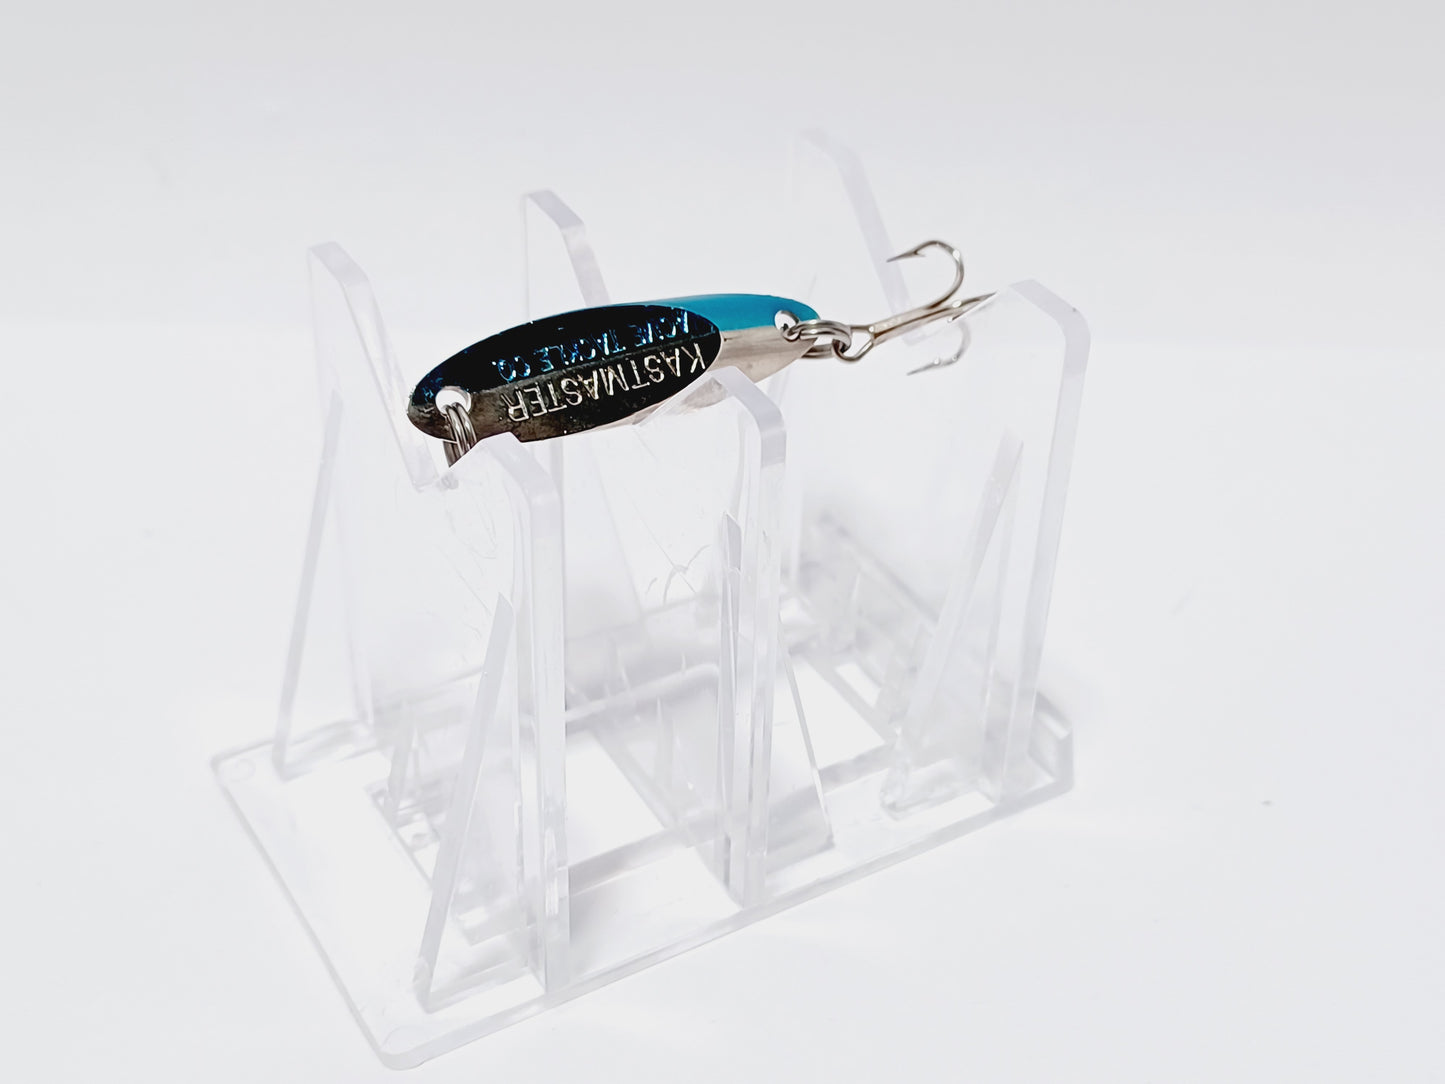 Classic Kastmaster blue silver trout lure